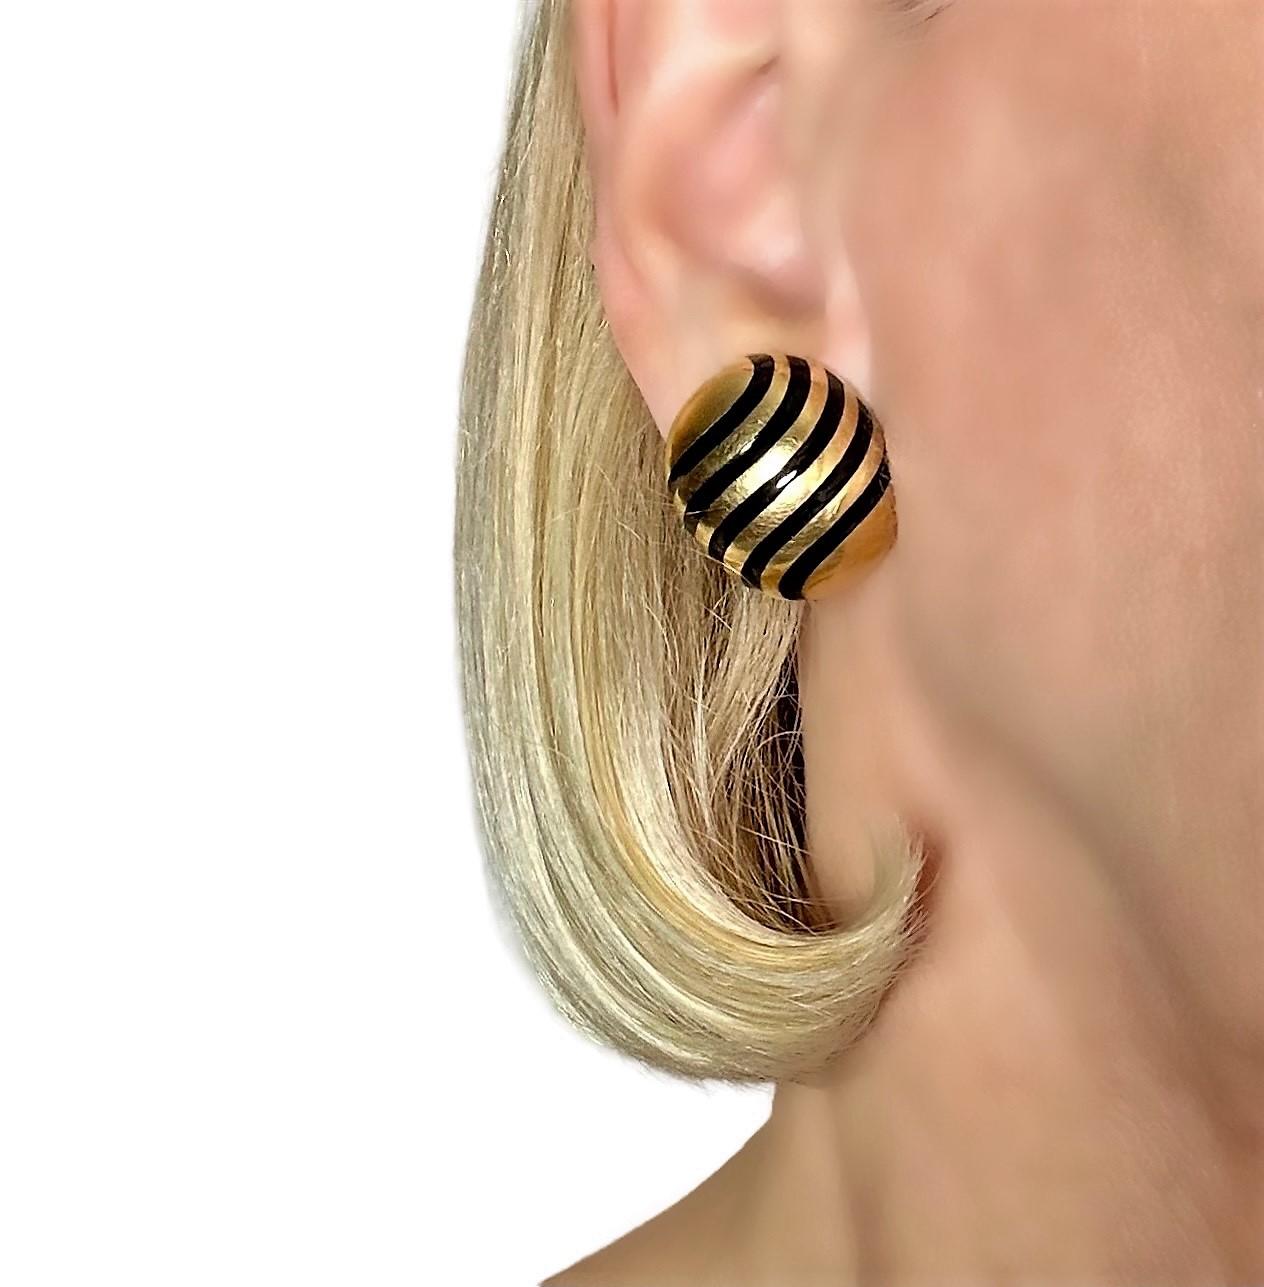 Chic Vintage French Cartier 18k Yellow Gold Earrings with Black Enamel Bands For Sale 1